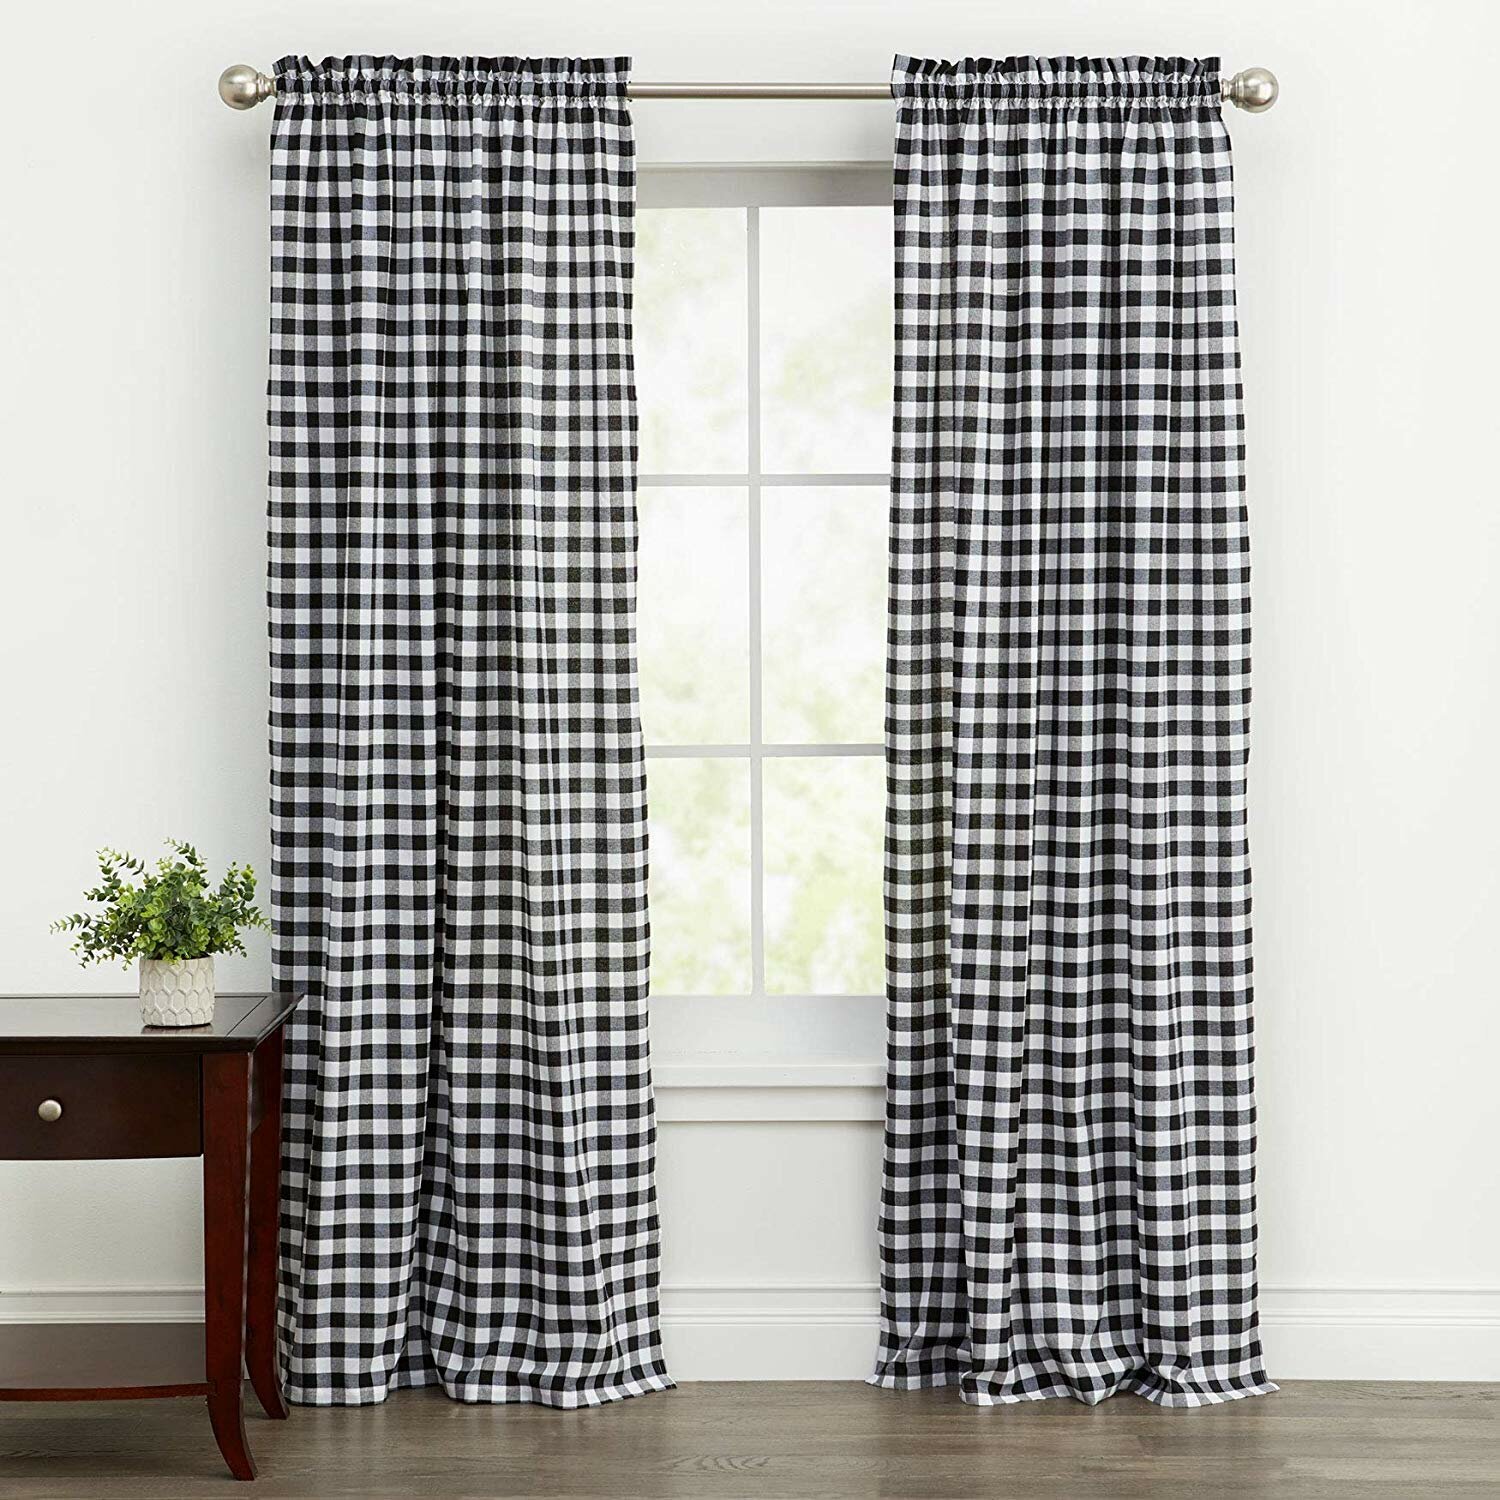 Gingham plaid curtains for living room